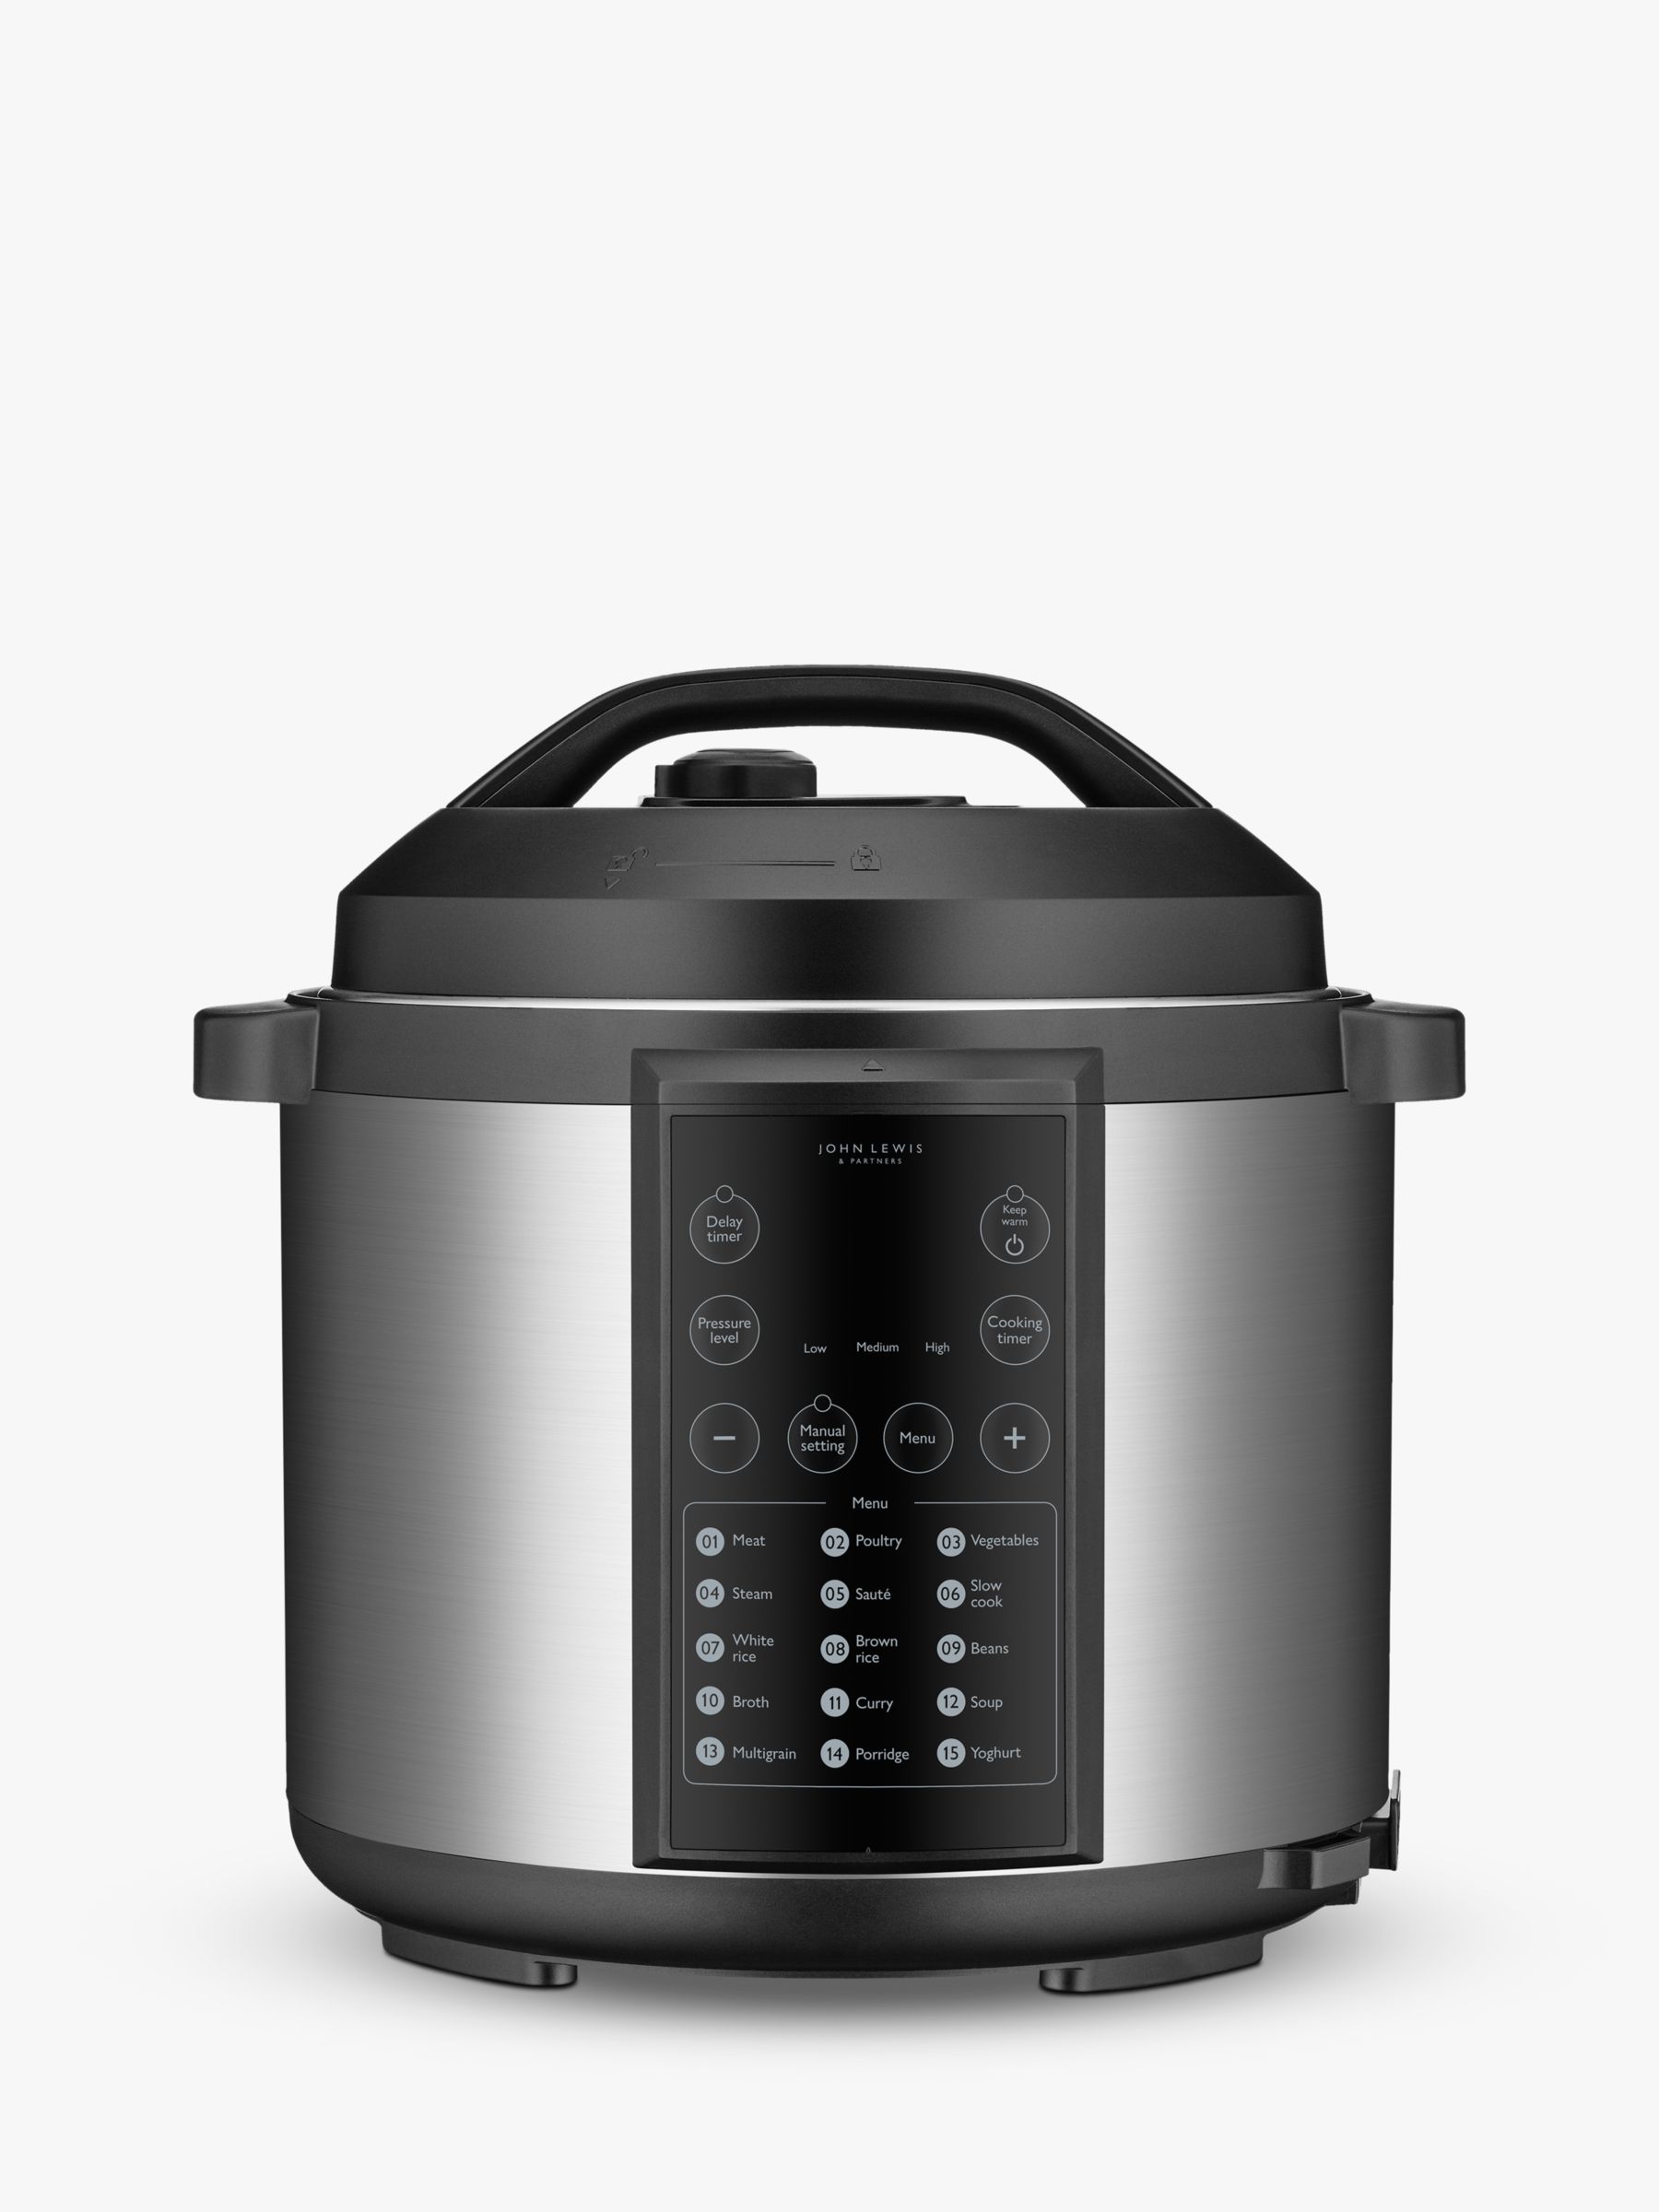 Crockpot Electric Slow Cooker | Programmable Digital Display | Large 7.5L  Capacity (up to 10 People) | Keep Warm Function & 20-Hour Countdown Timer 